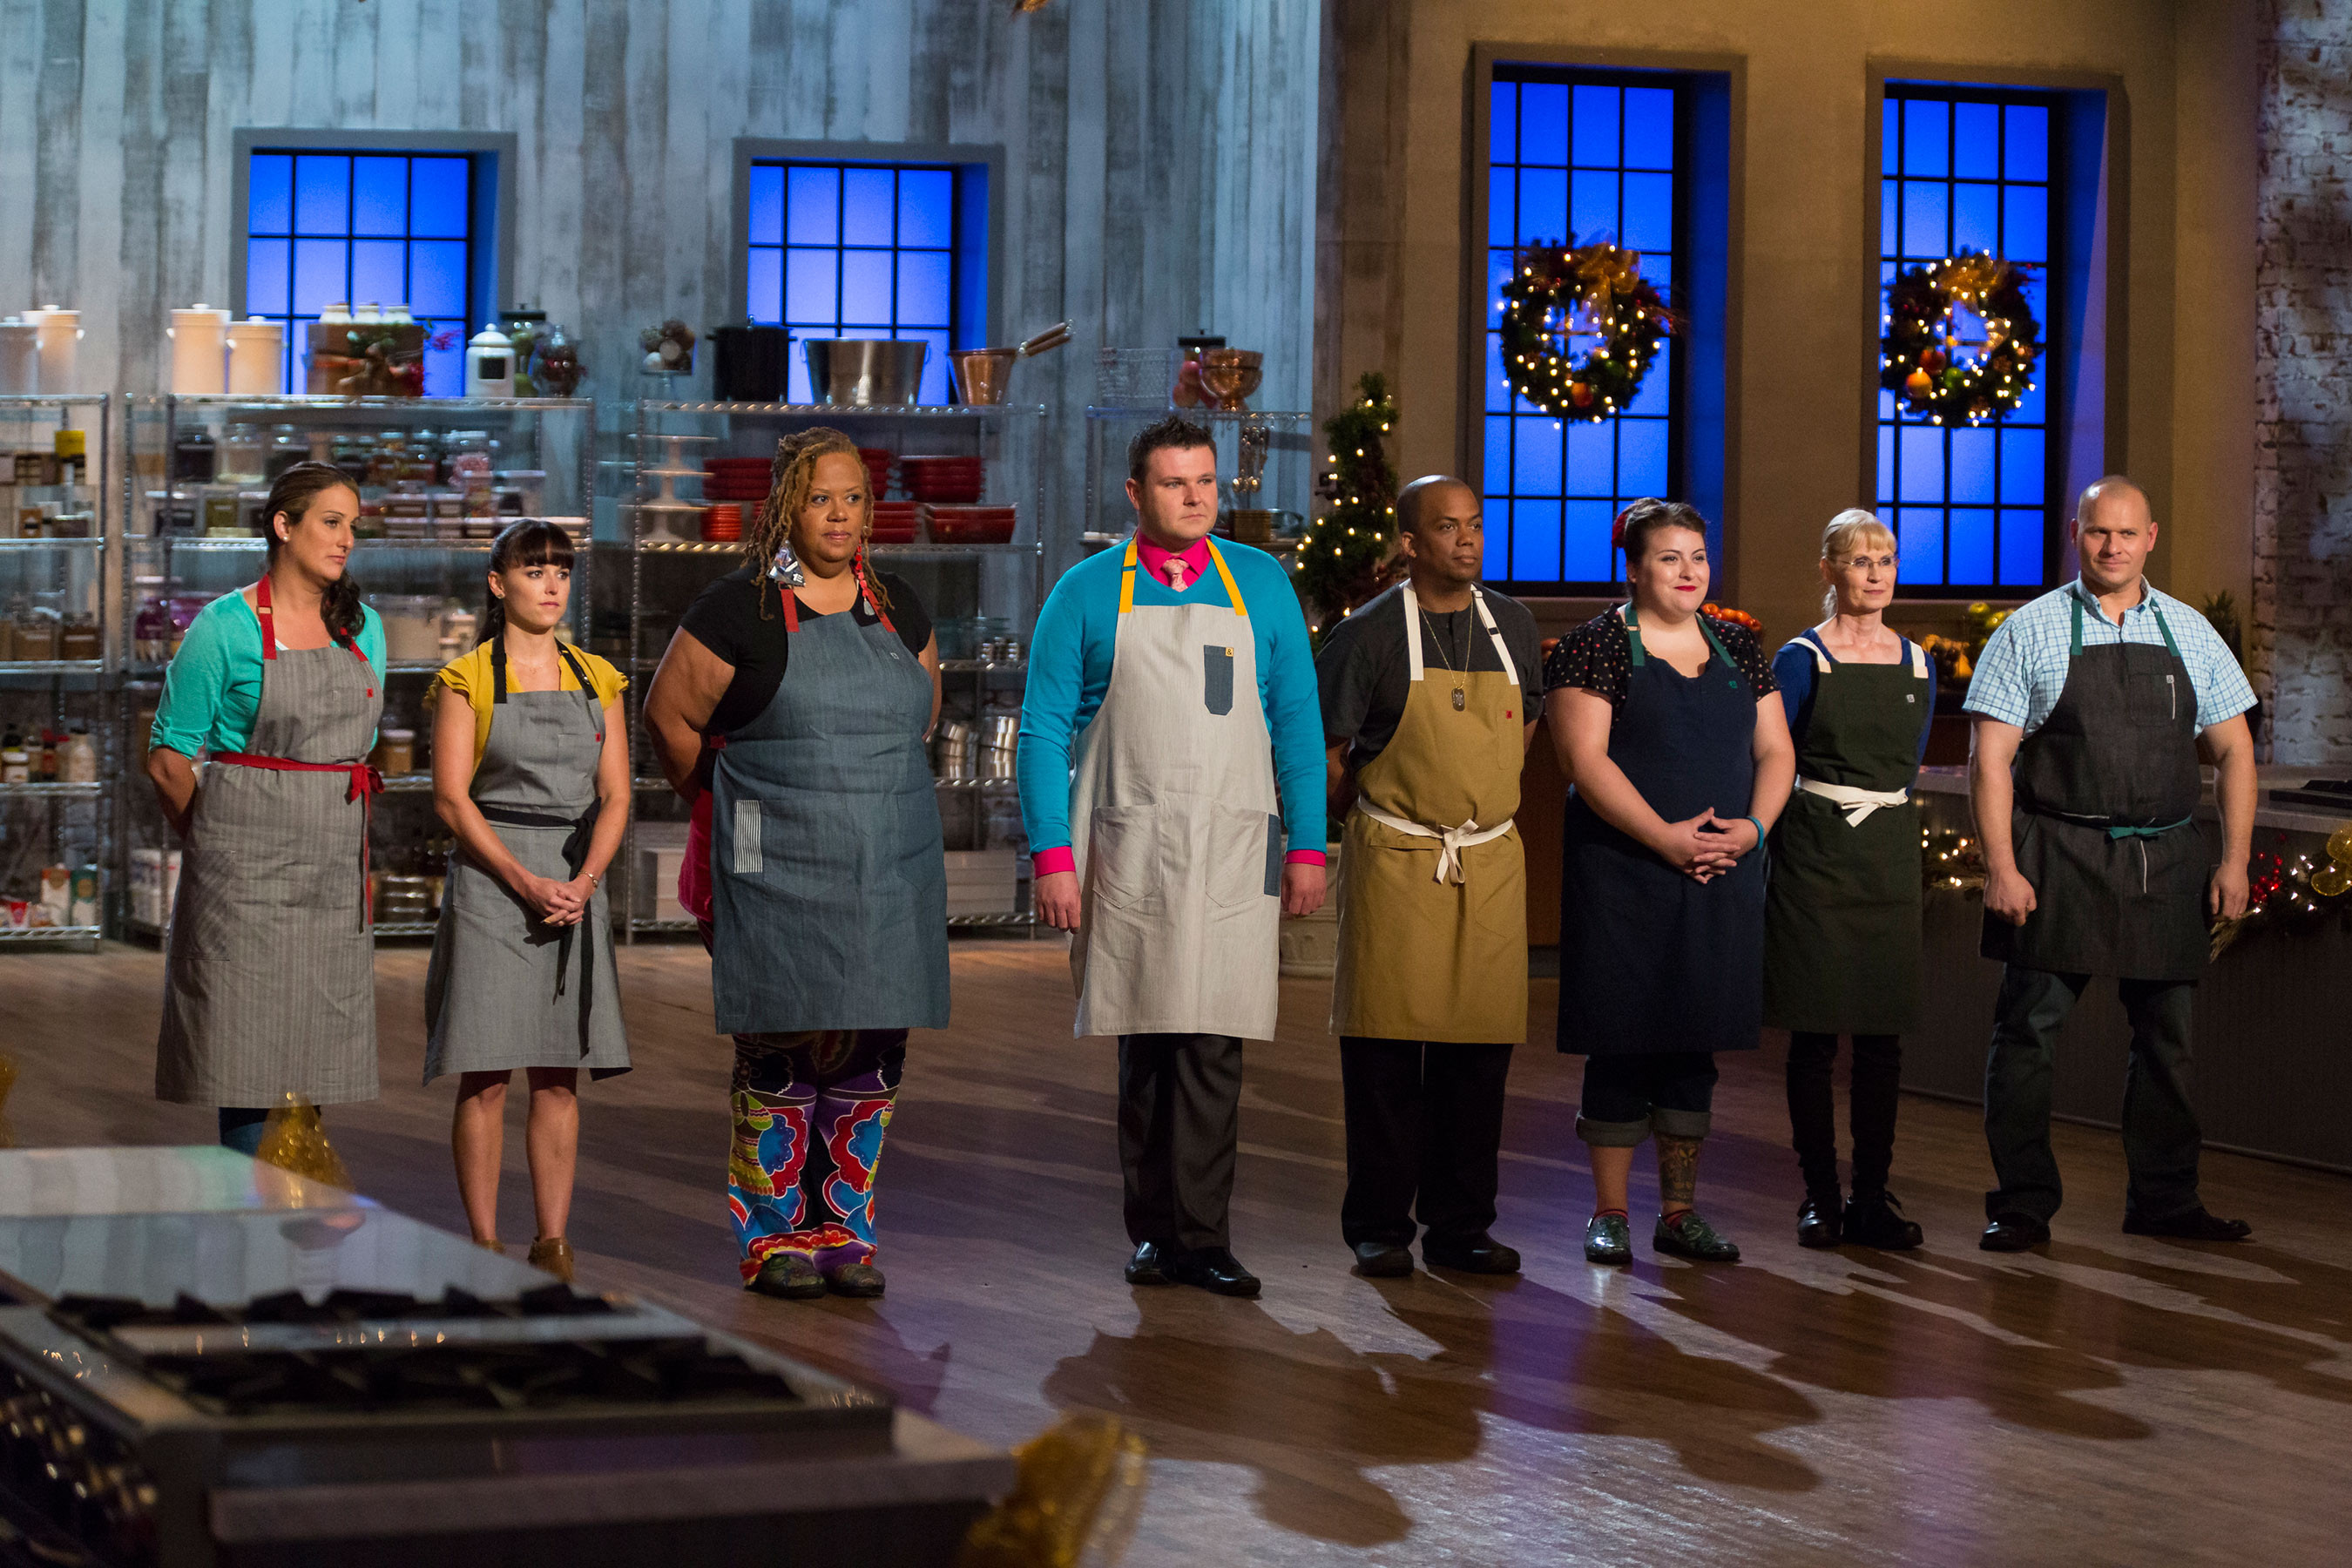 Christmas Baking Championship
 HOLIDAYS AT FOOD NETWORK GET EVEN SWEETER WITH NEW SERIES